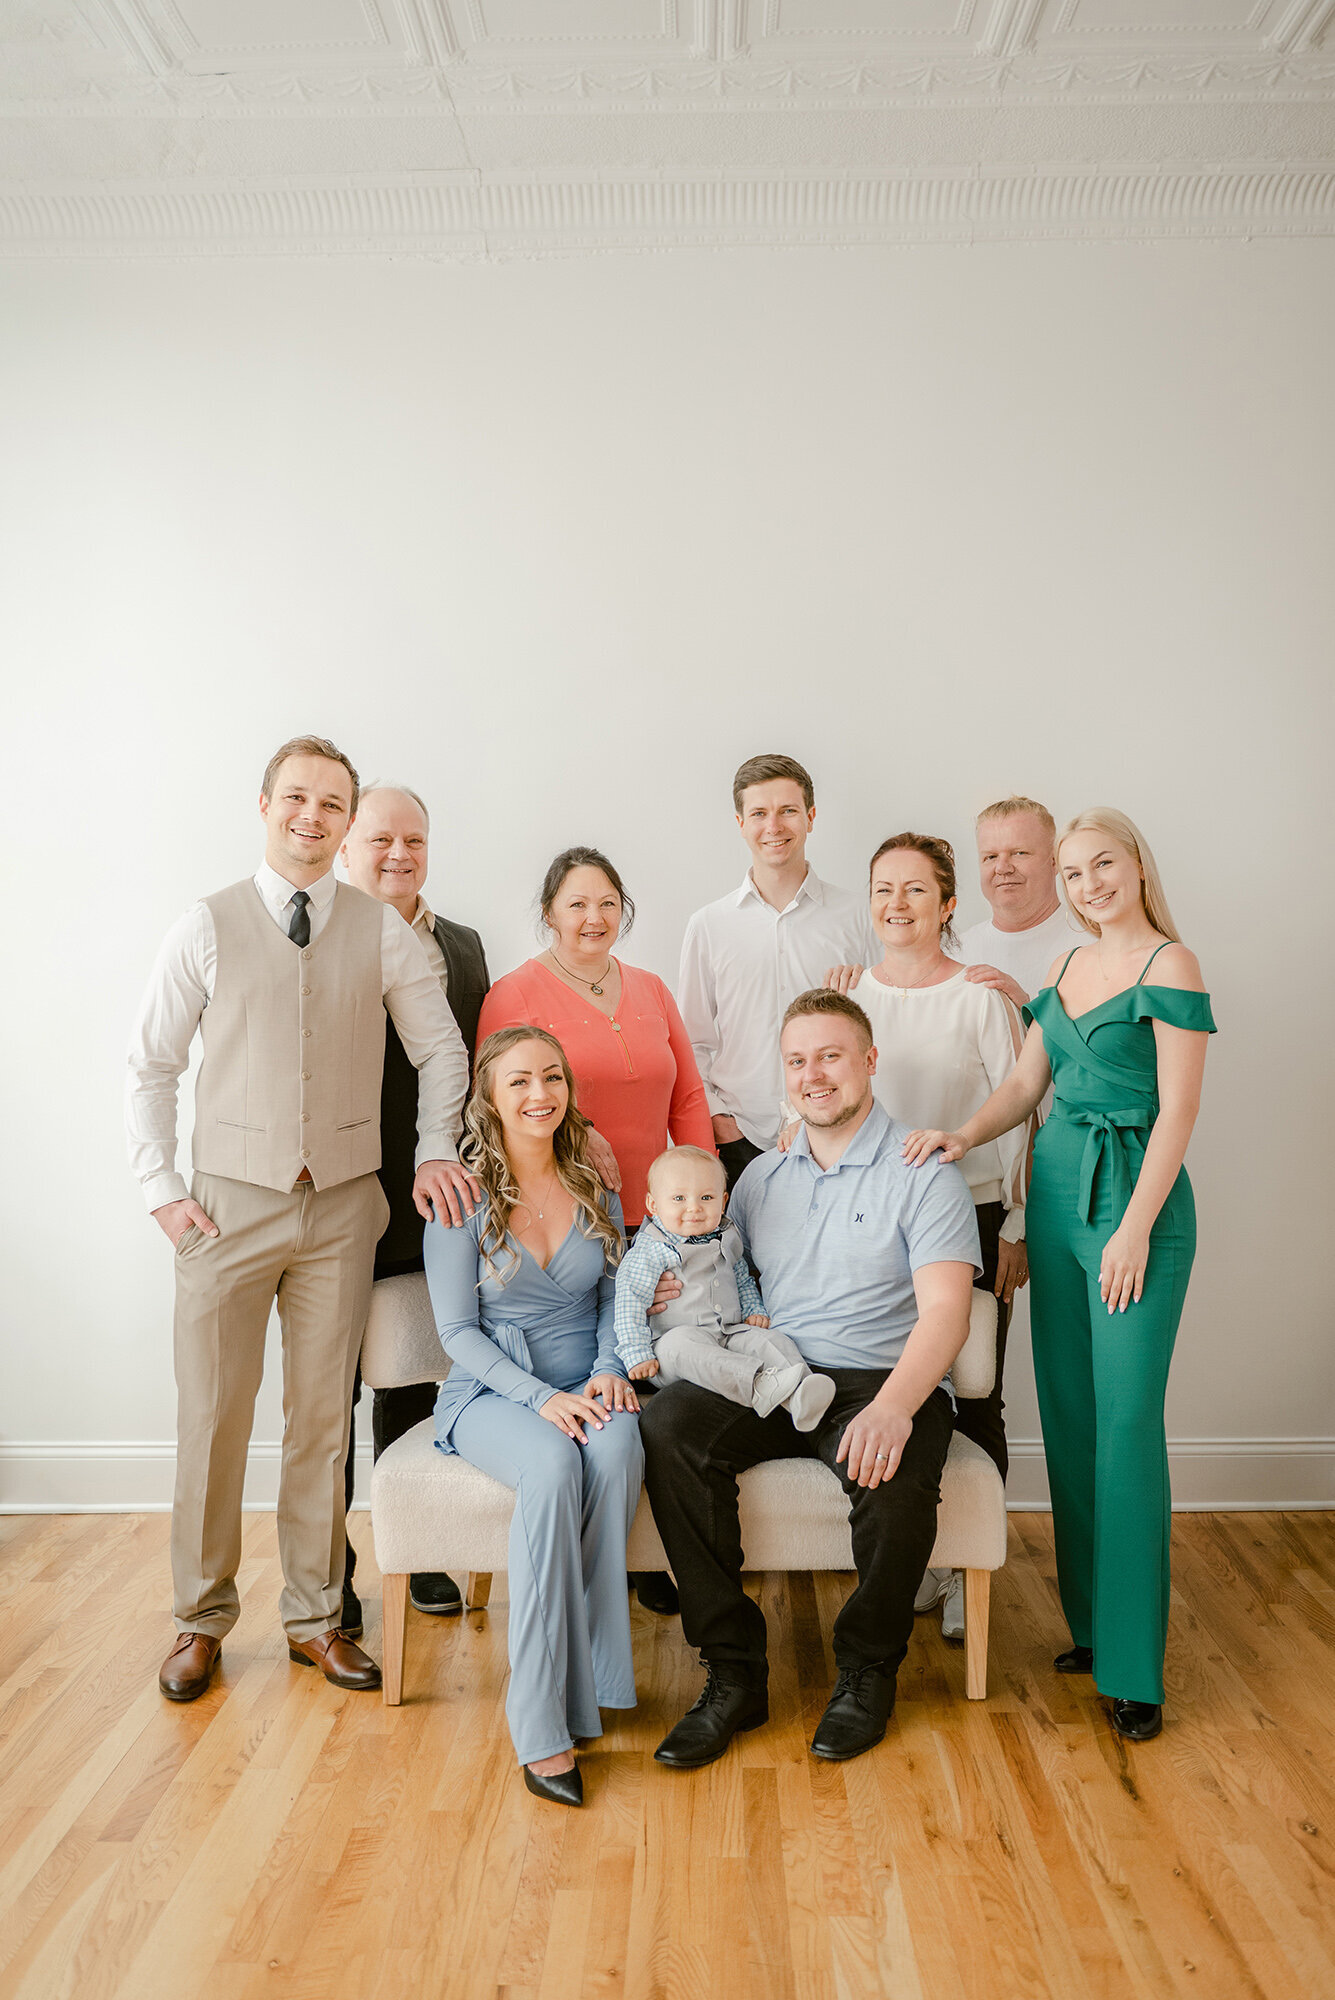 Studio extended family portraits in Chicago